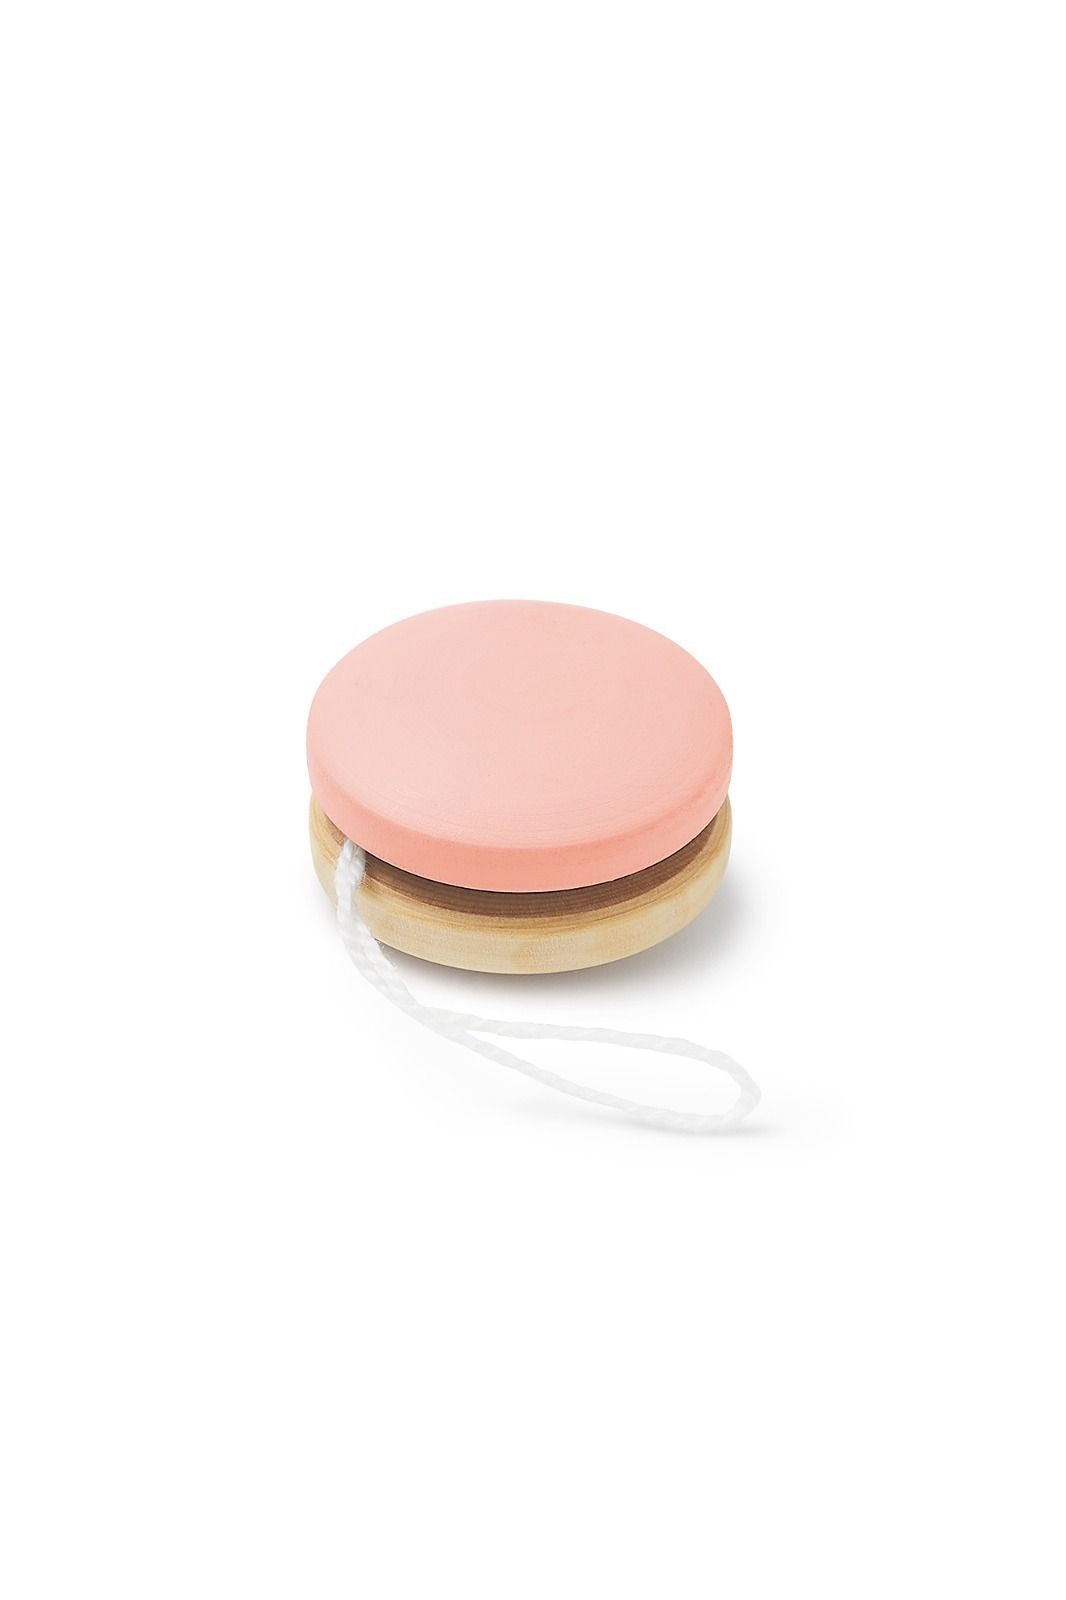 Mini Wooden YoYo Coral - Eco-friendly and entertaining toy for sustainable and nostalgic play